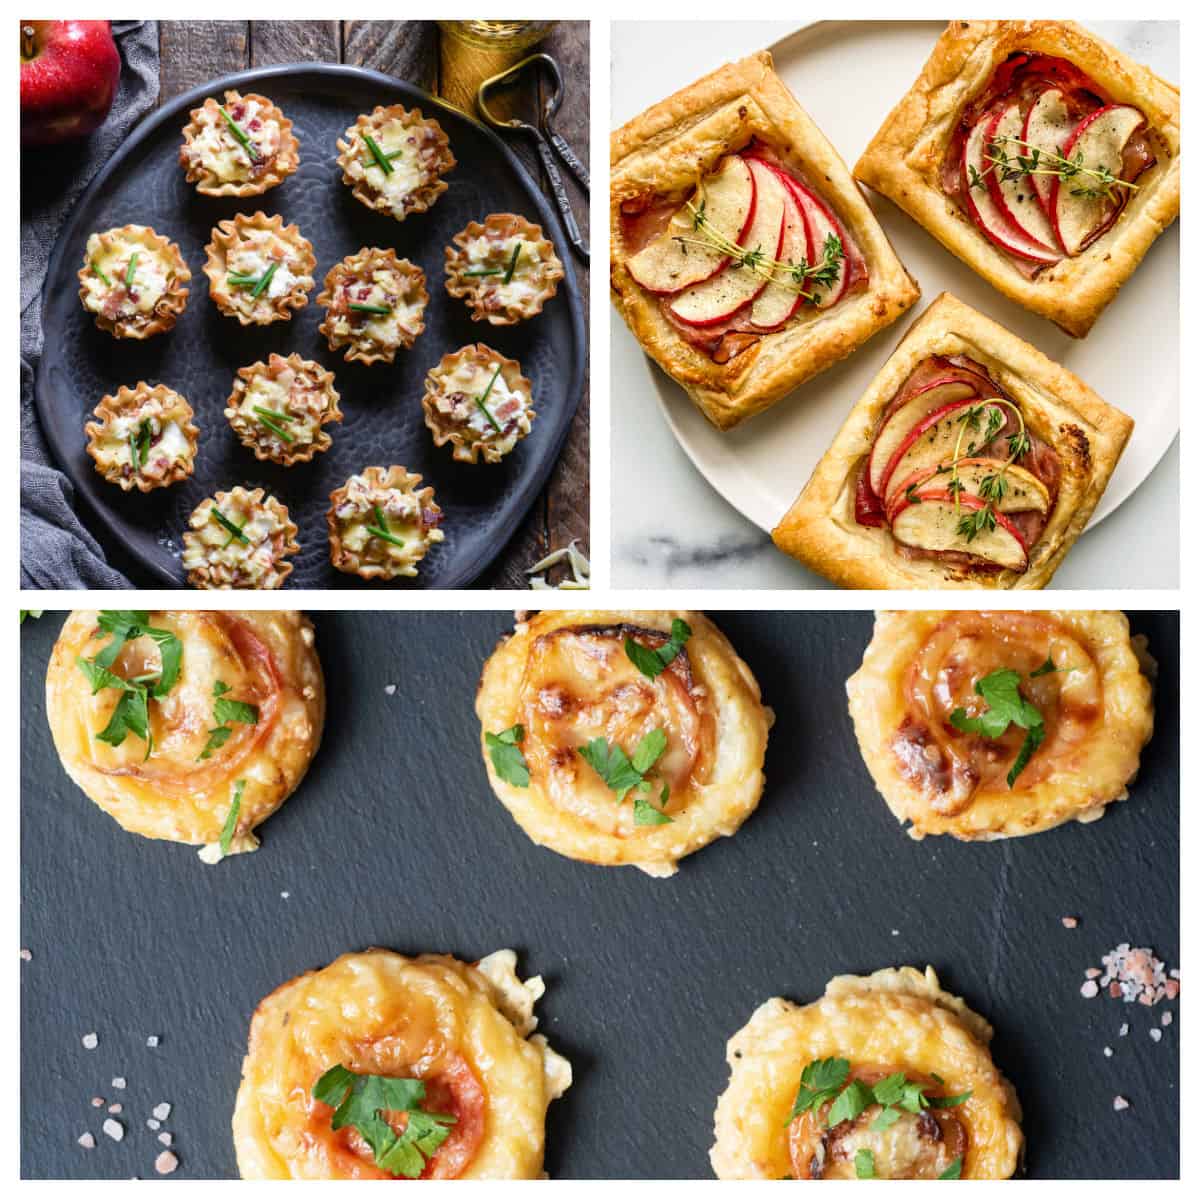 Mini tarts on plates in a collage.